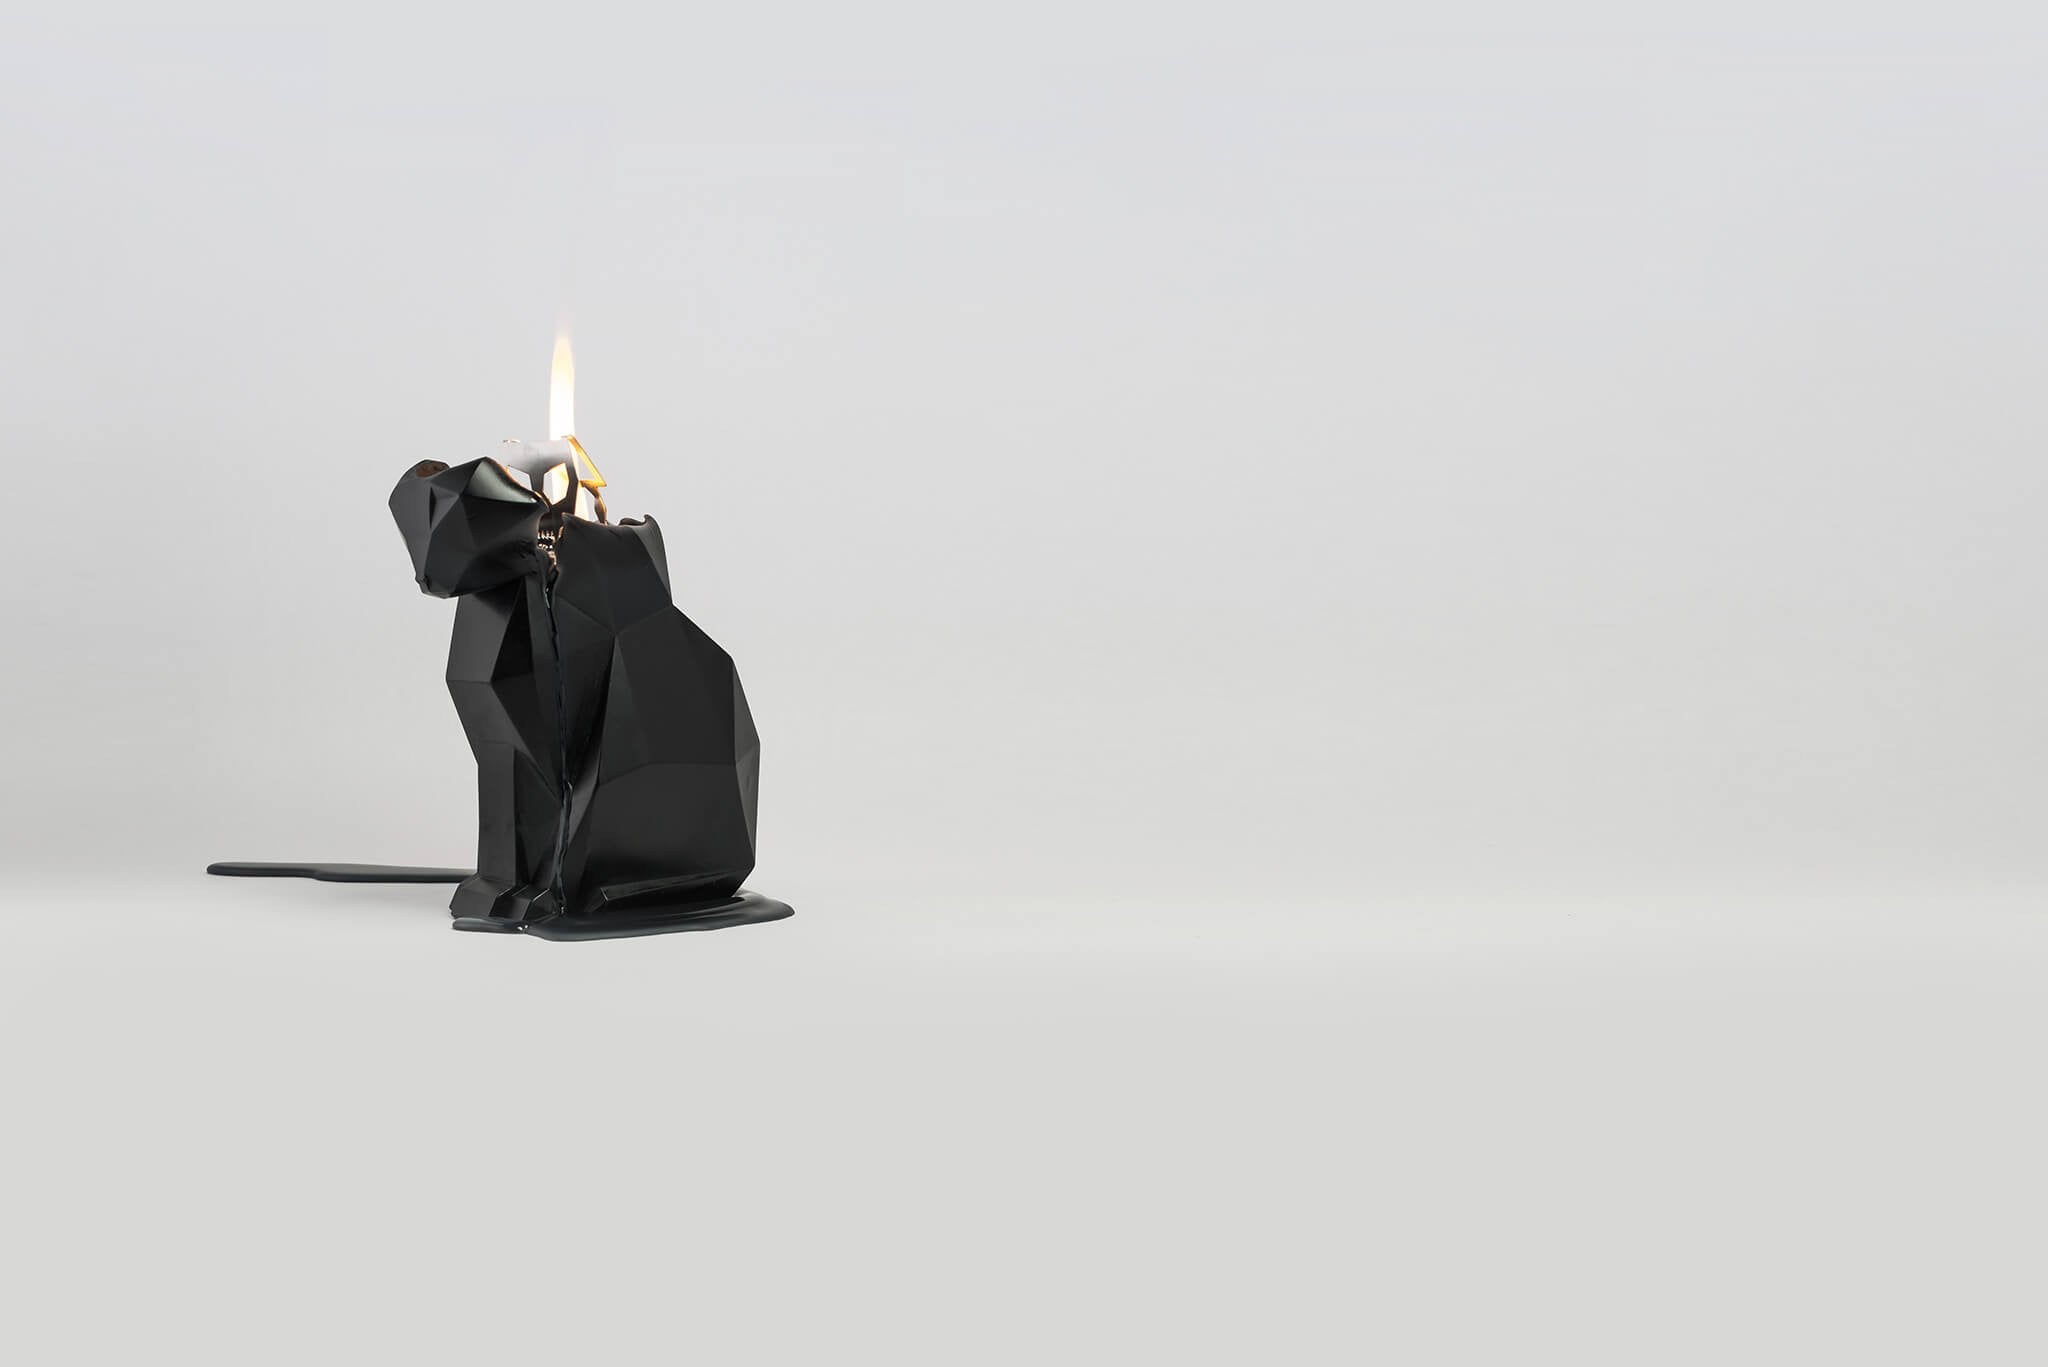 Side view of burning black kisa the cat pyropey candle. Her head is starting to melt. 